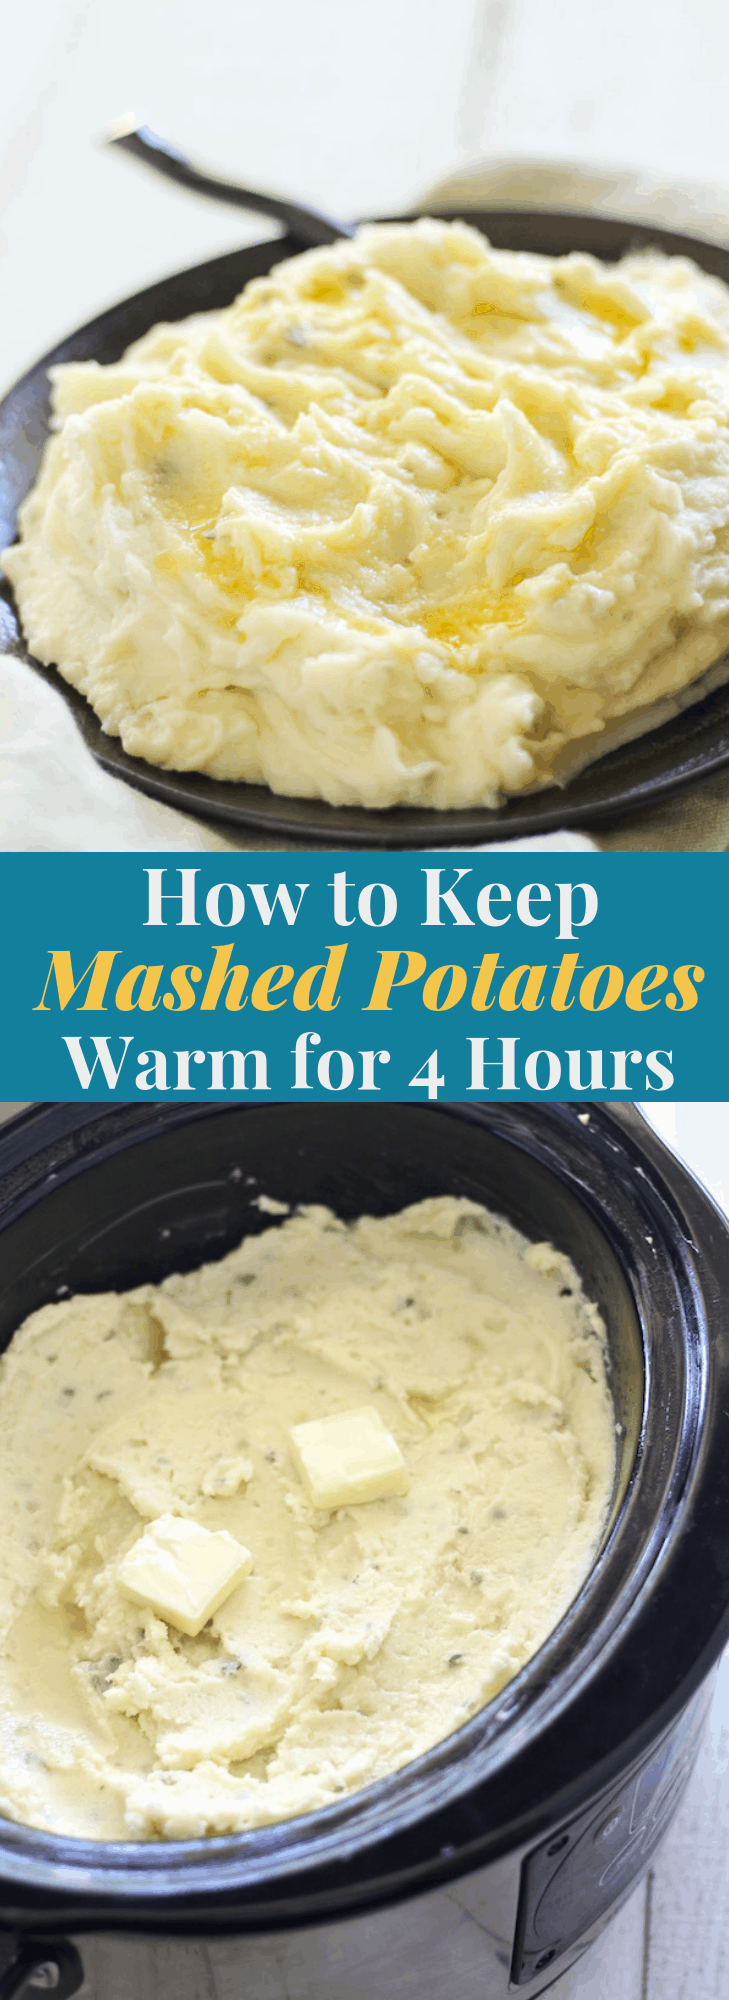 How to keep mashed potatoes warm in the crockpot, slow cooker, or Instant Pot #mashedpotatoesrecipe #mashedpotatoeswithcreamcheese #mashedpotatoesslowcooker #mashedpotatoesinstantpot